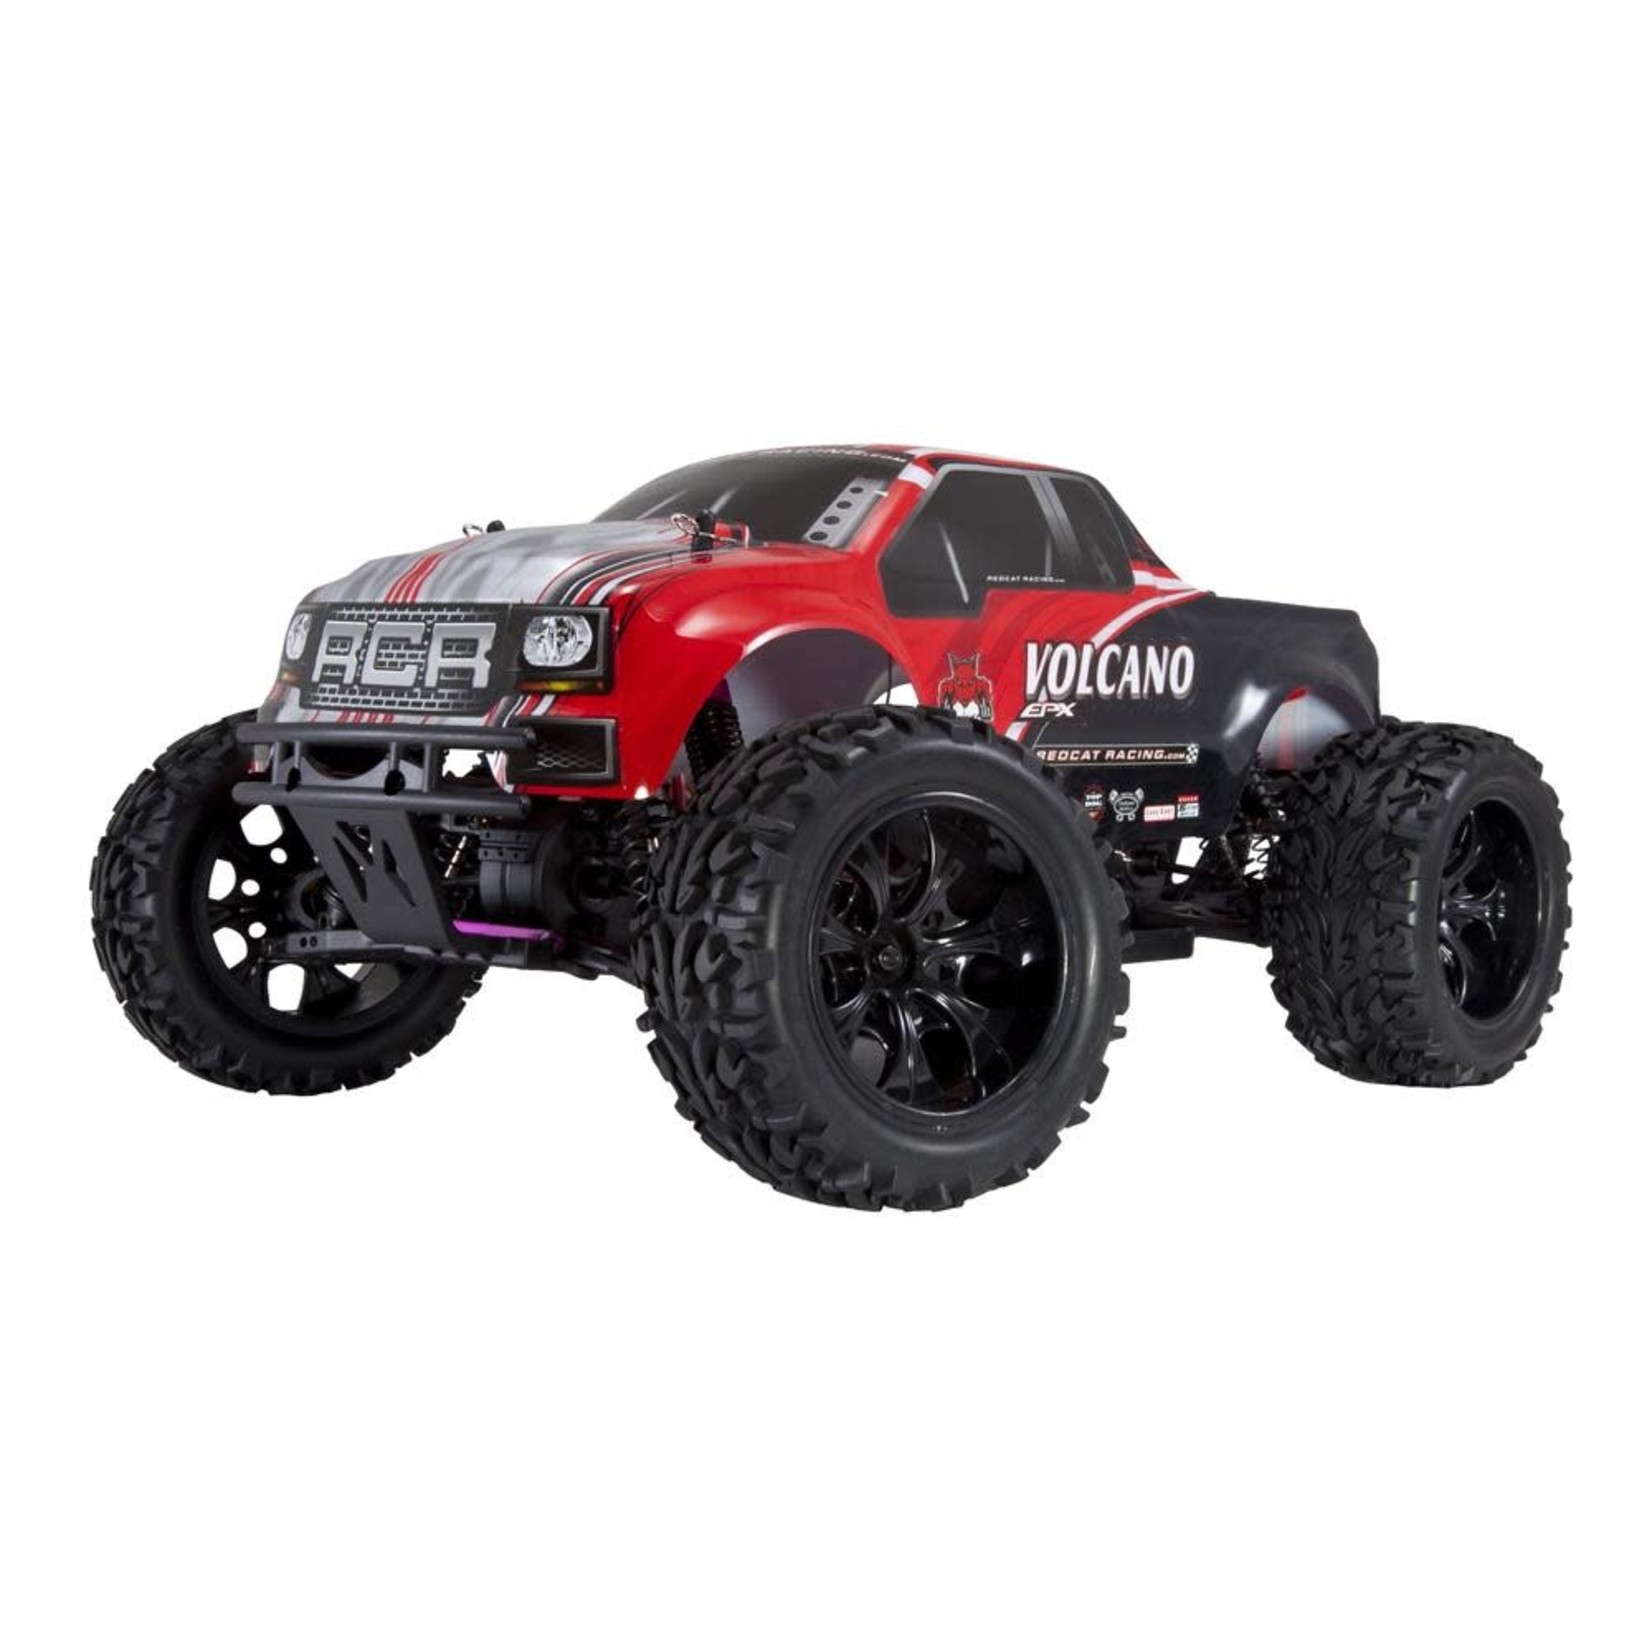 Redcat Racing 1/10 Volcano 4x4 EPX Brushed MT